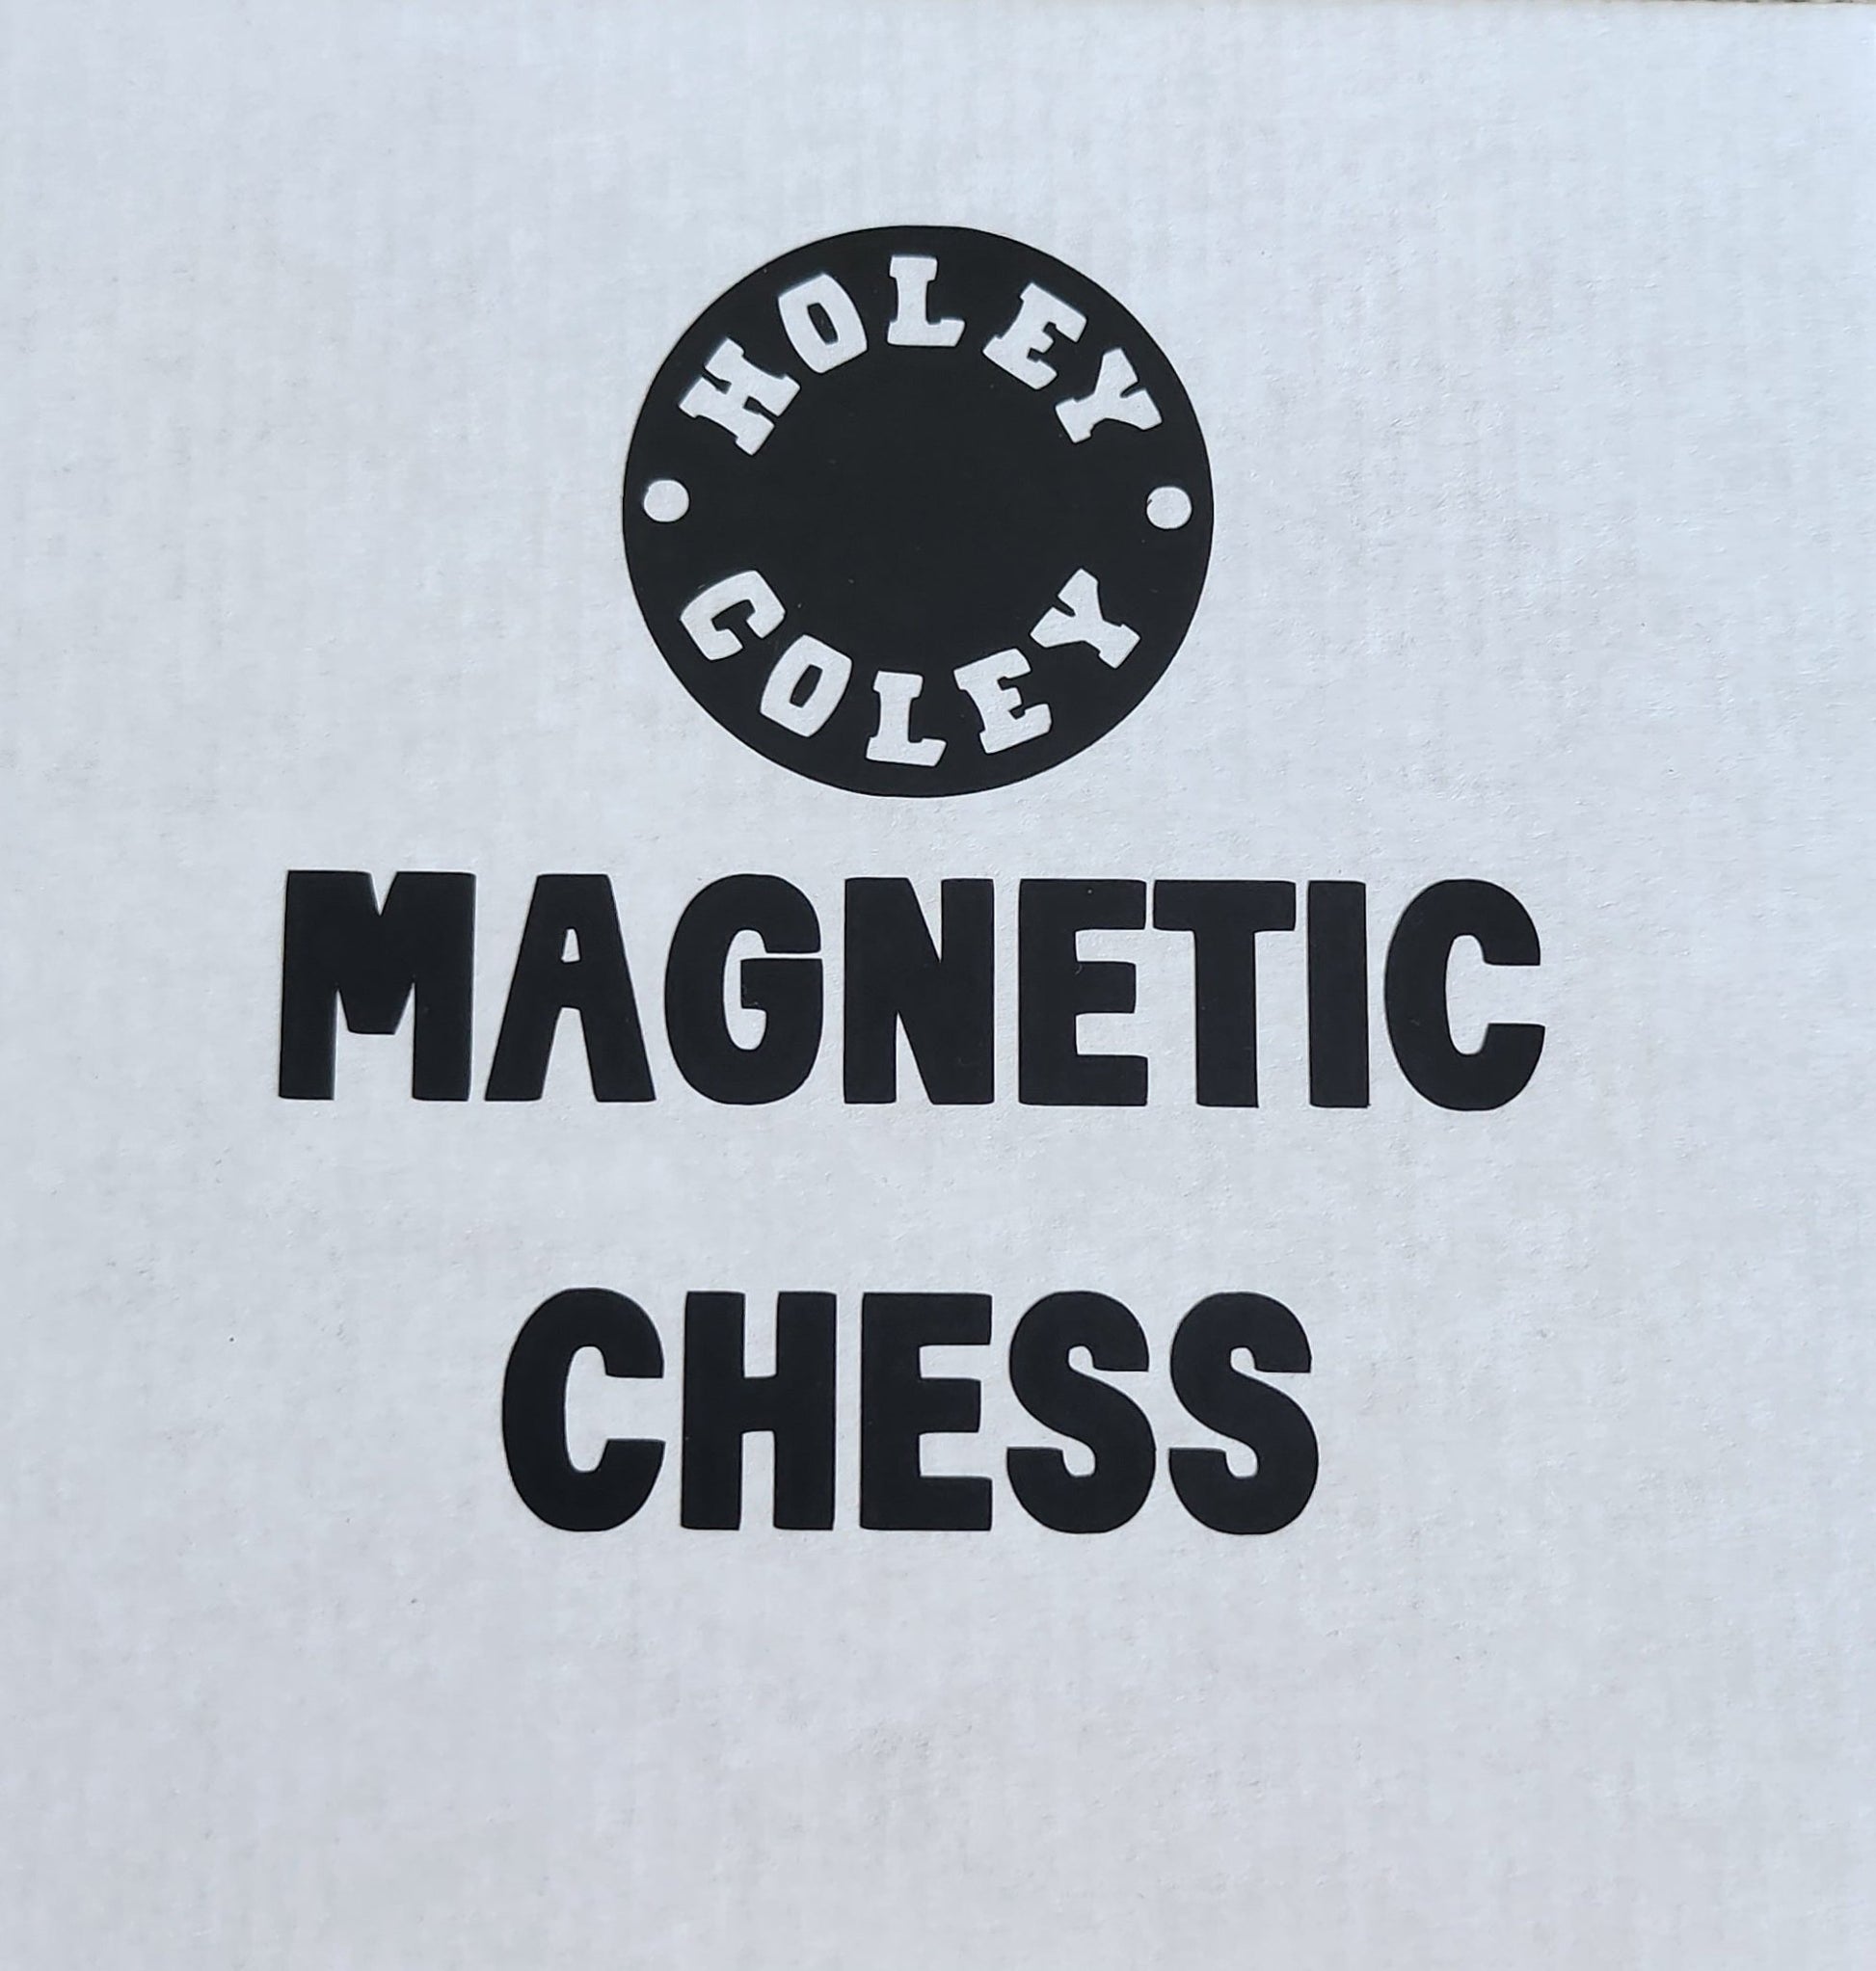 Magnetic Chess Game - holeycoley.nz